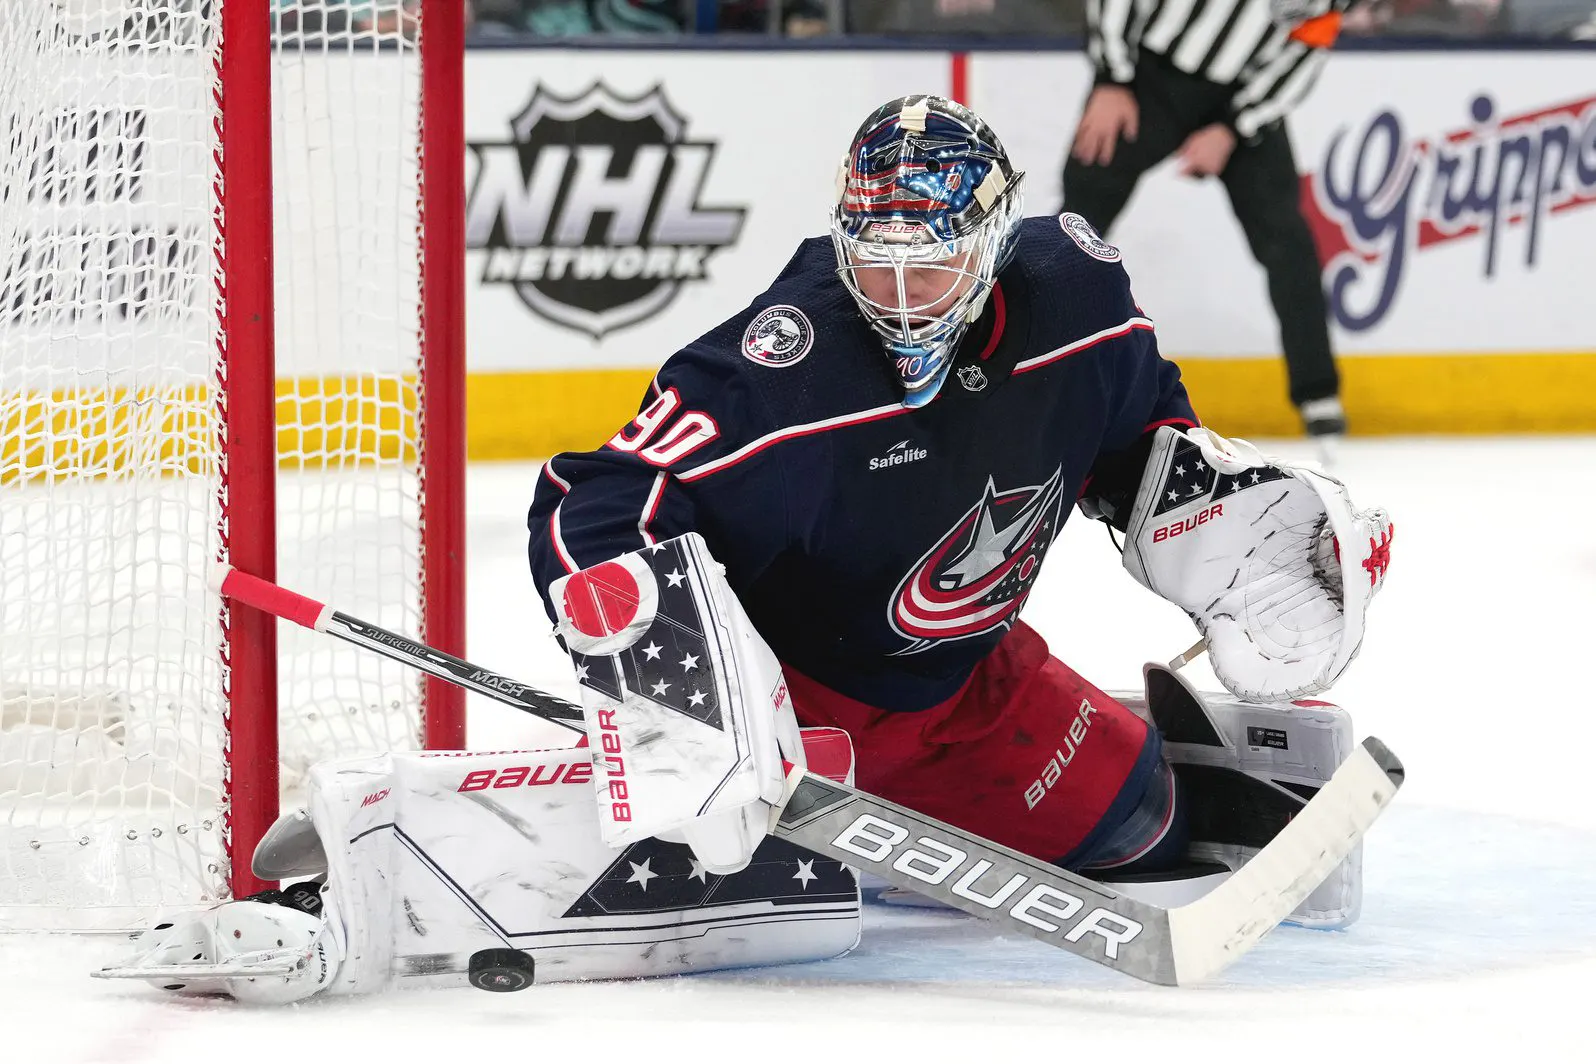 After another brutal season, what’s next for the Columbus Blue Jackets?